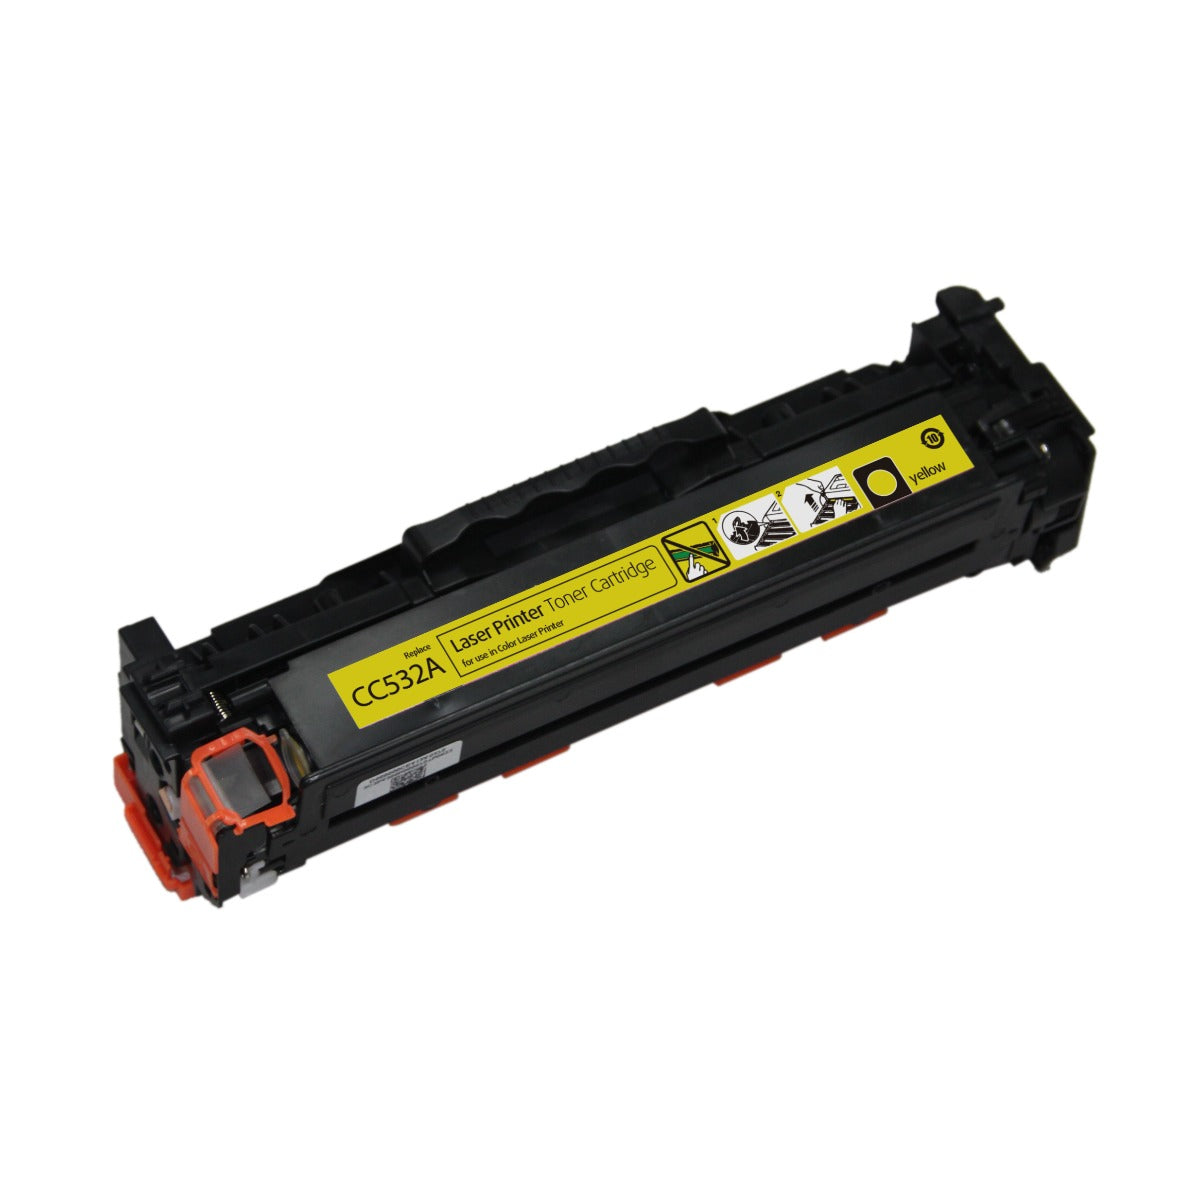 IMPERIAL BRAND Compatible toner cartridge for HP 304A YELLOW TONER 2800 PAGES